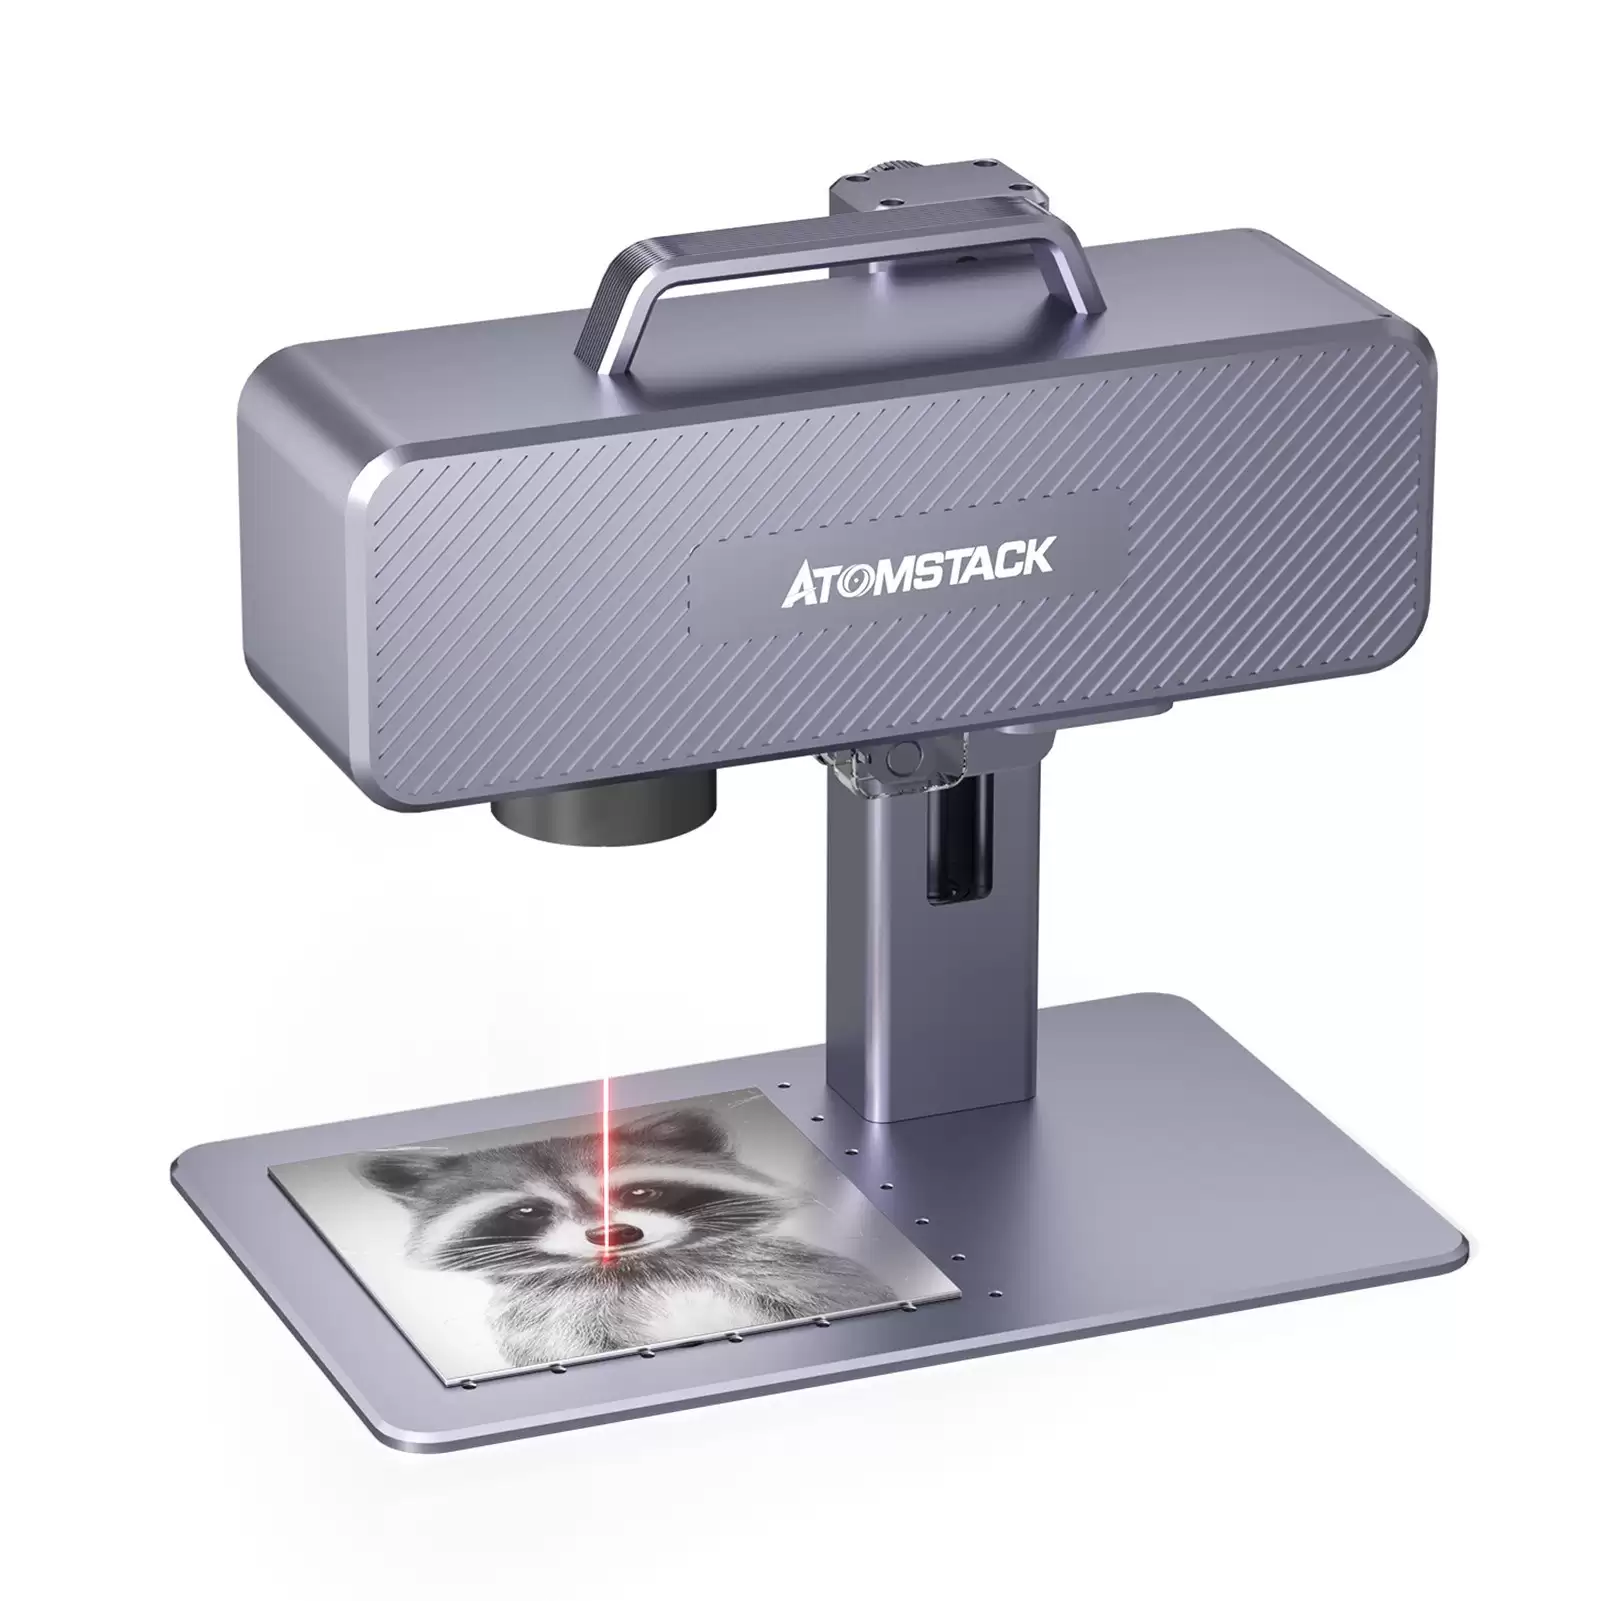 Order In Just $979 2 In 1 Atomstack M4 Infrared Laser Engraving Marking Machine With Rotating Optical Len At Tomtop